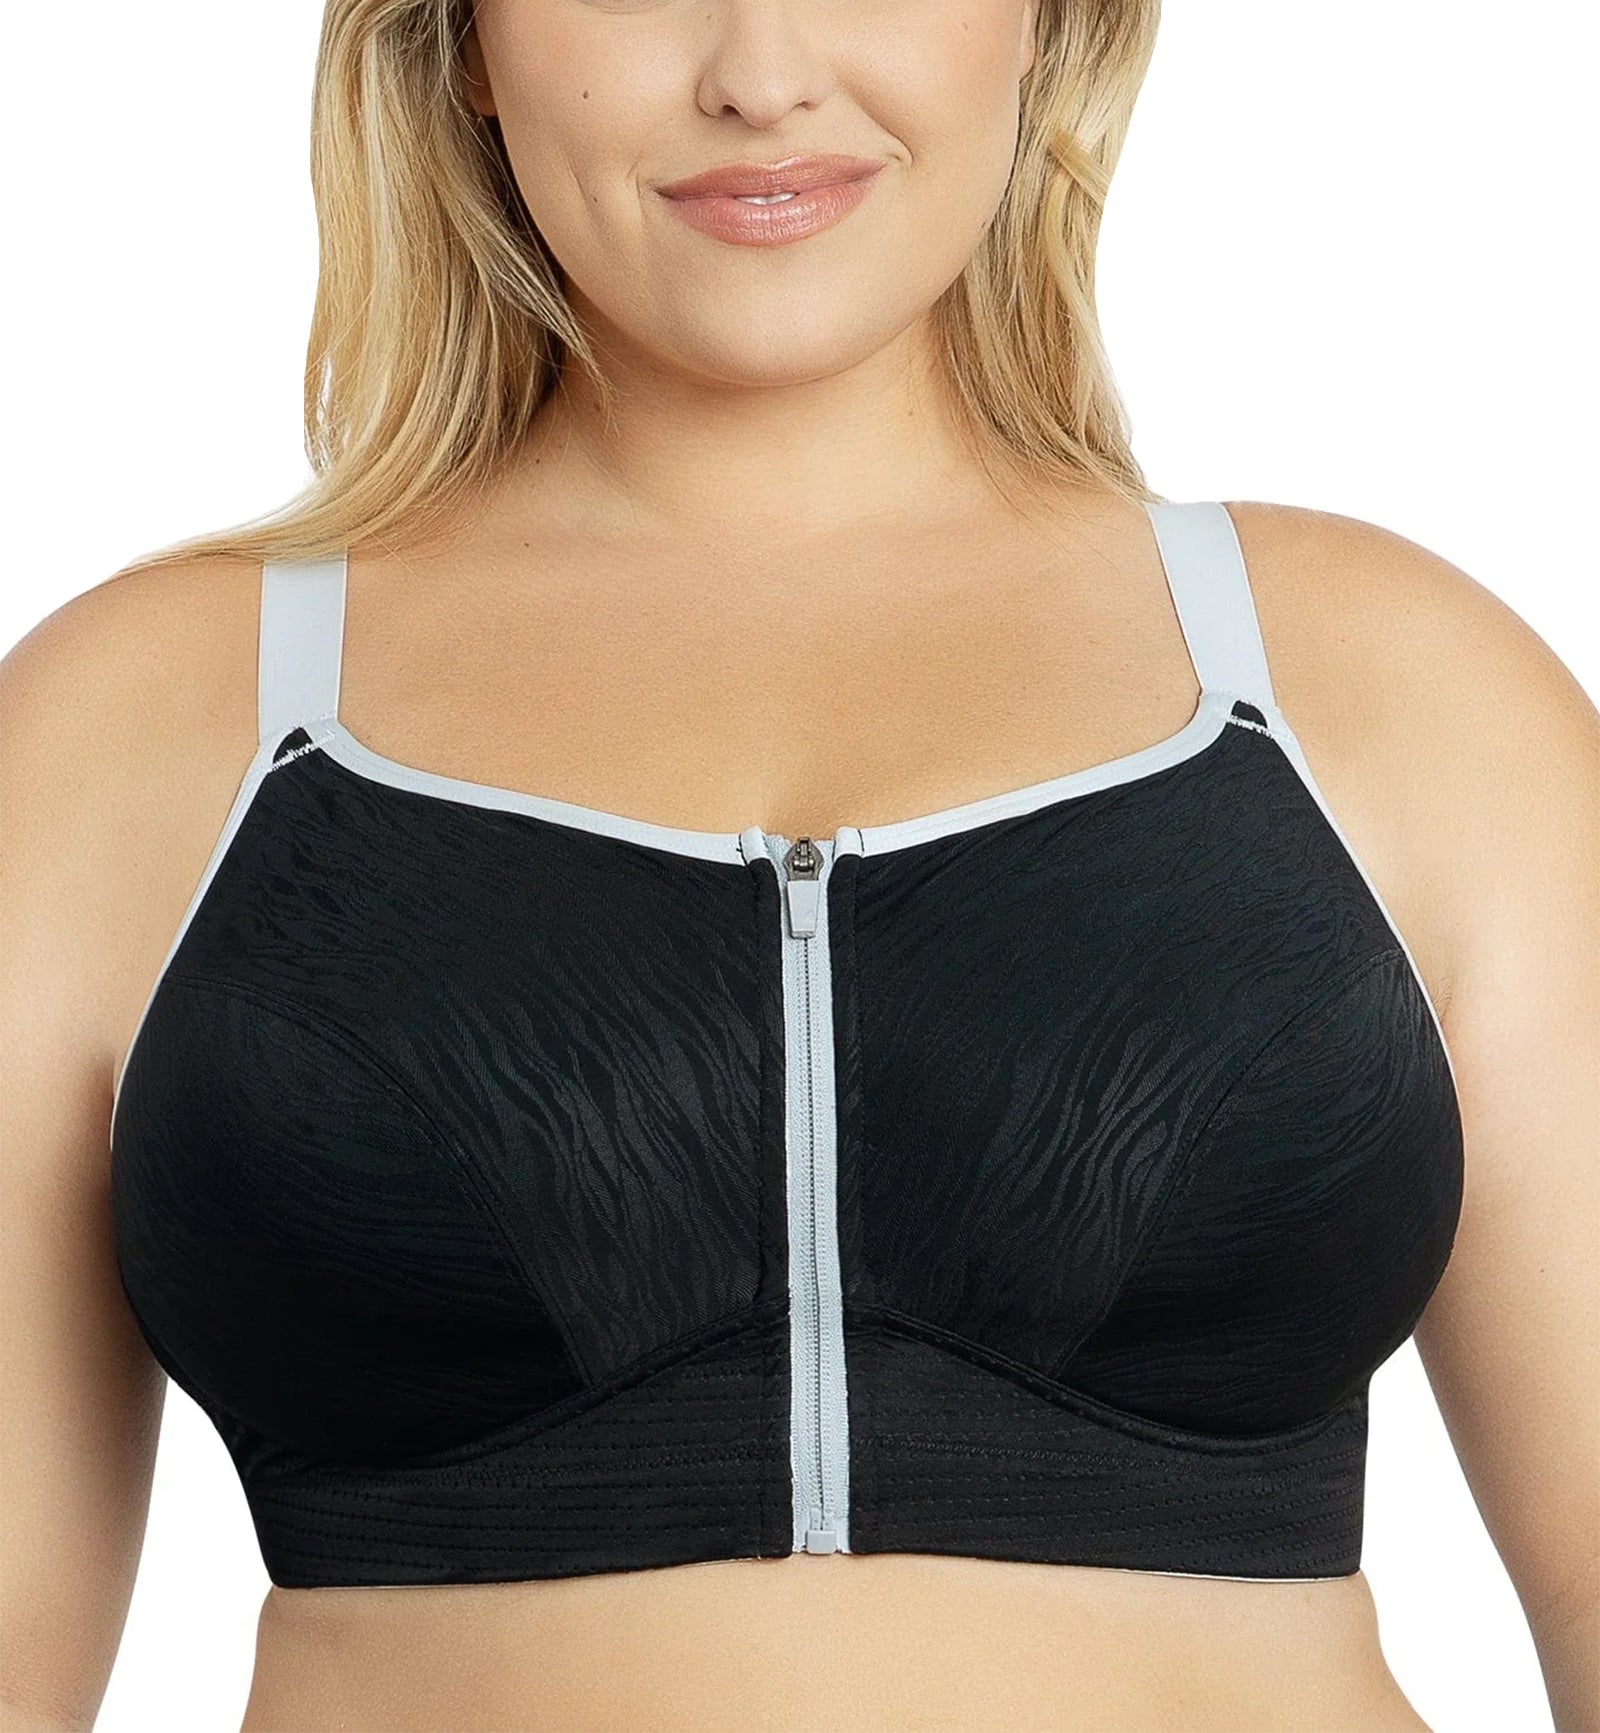 32F UK/ 32G US Tagged front-closure-bras - Breakout Bras